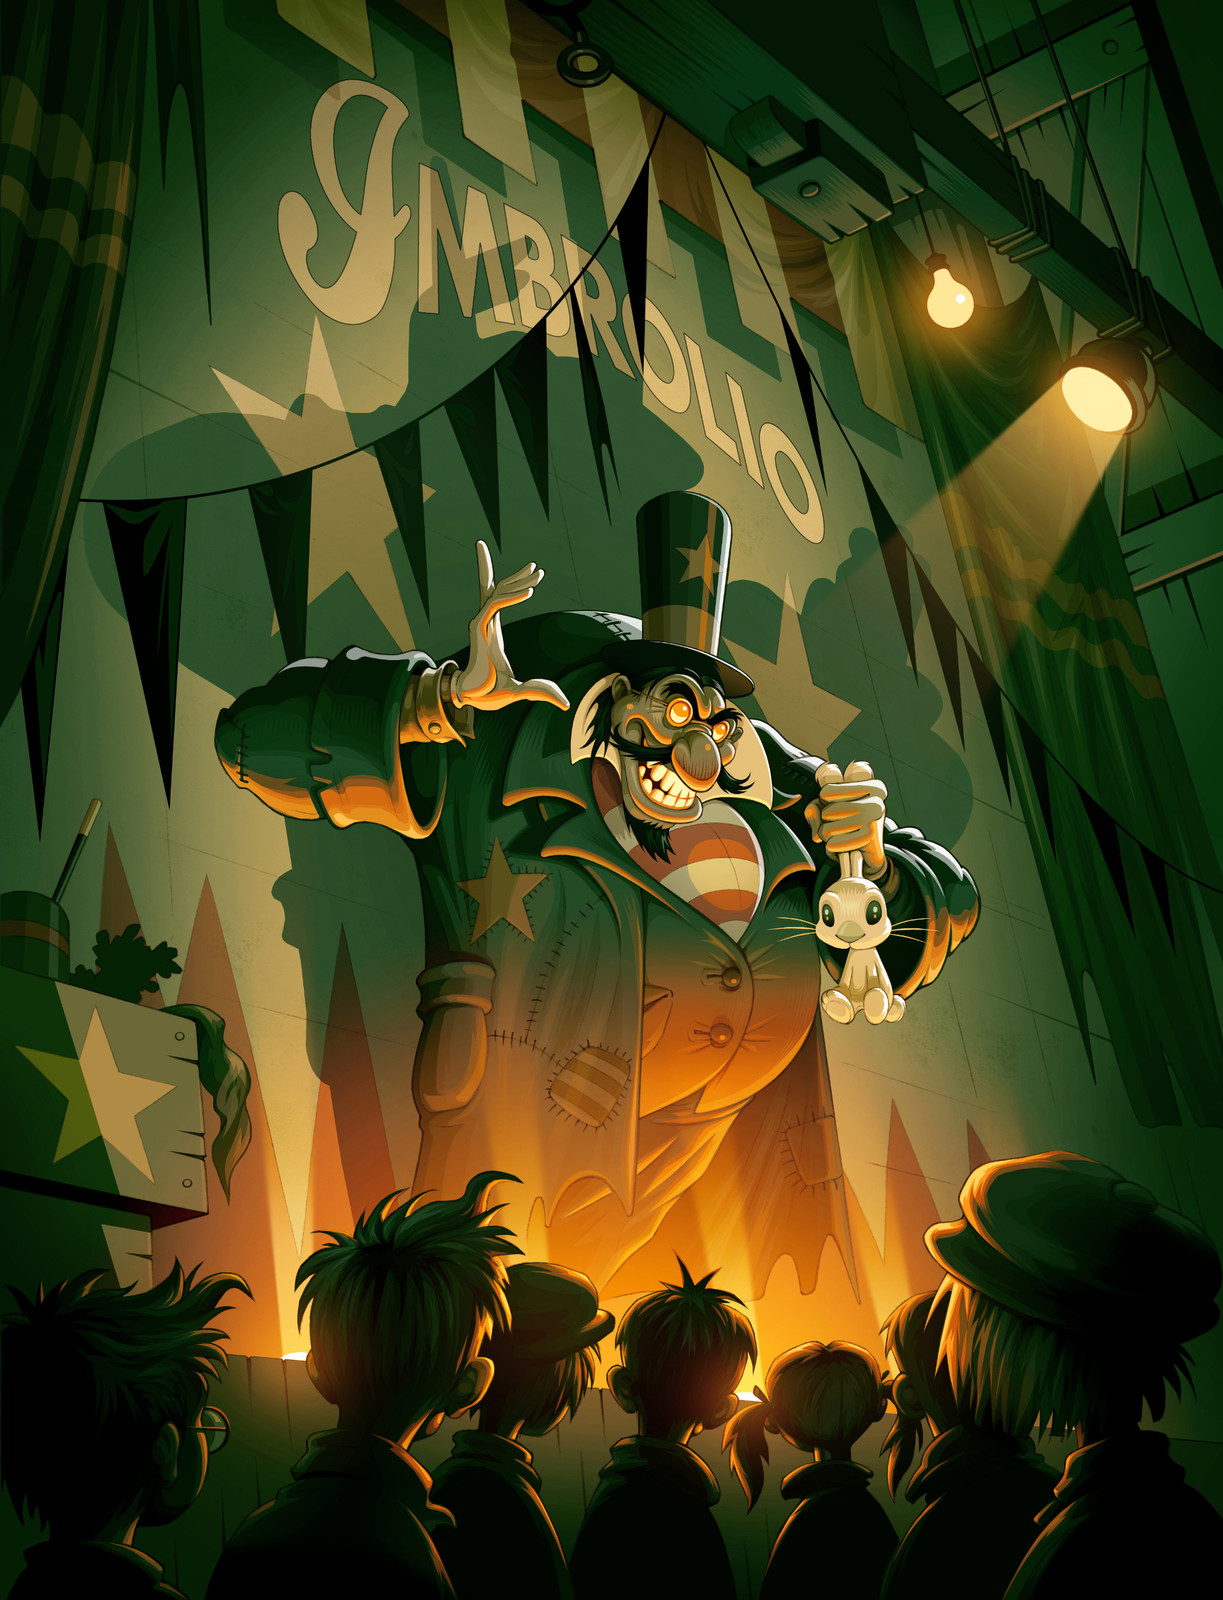 Escape from Hat book illustration